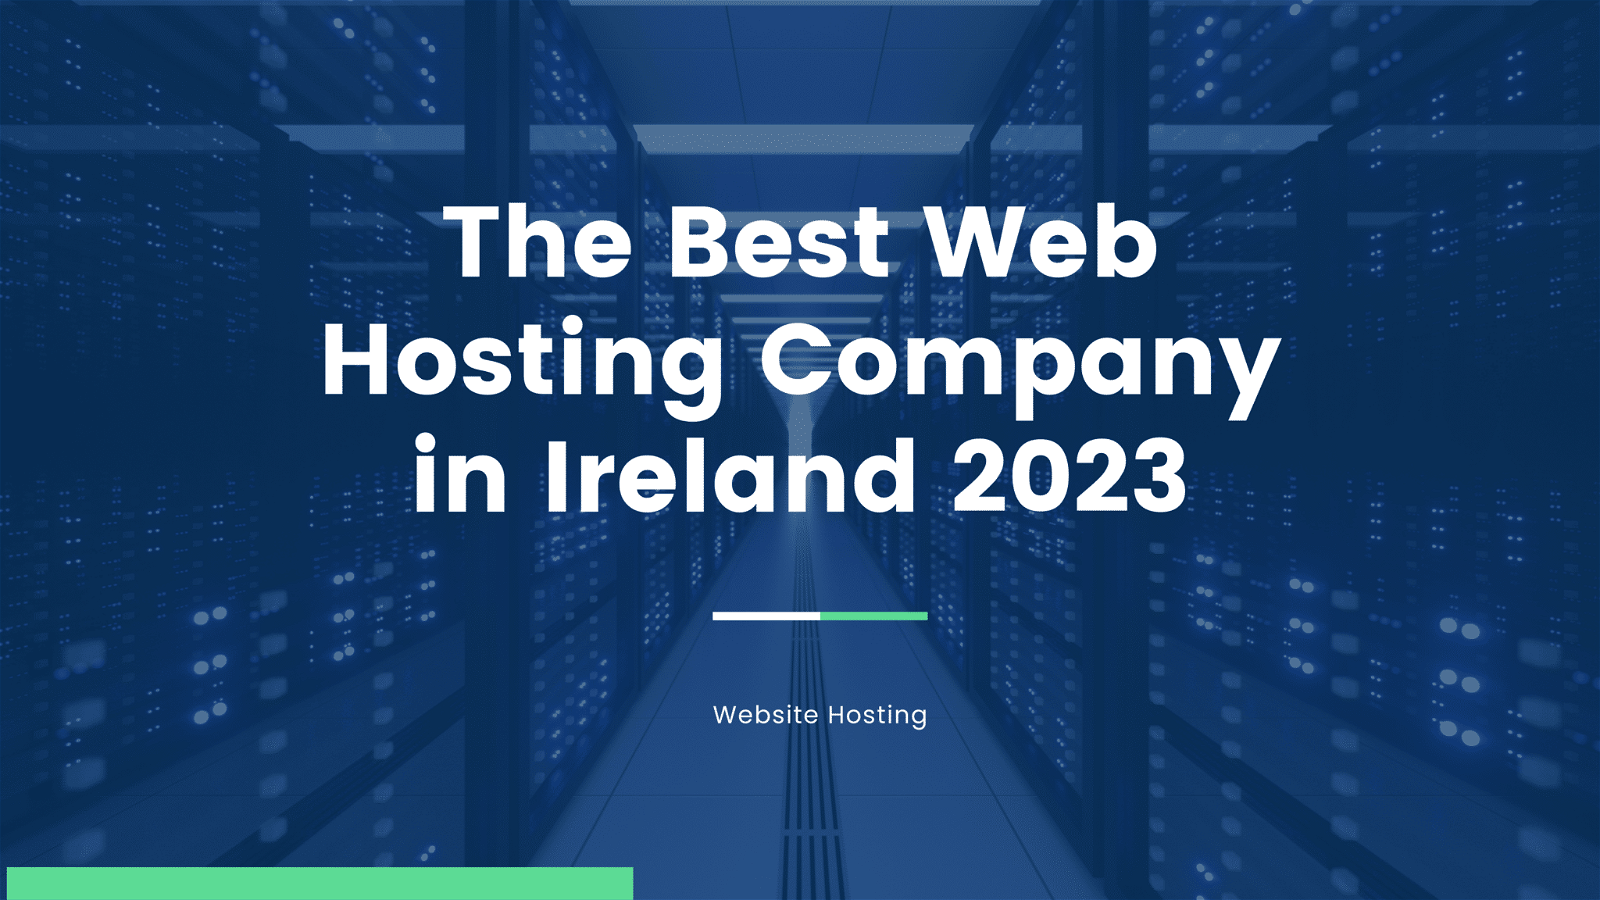 This image is showcasing the best web hosting company in Ireland for the year 2023.